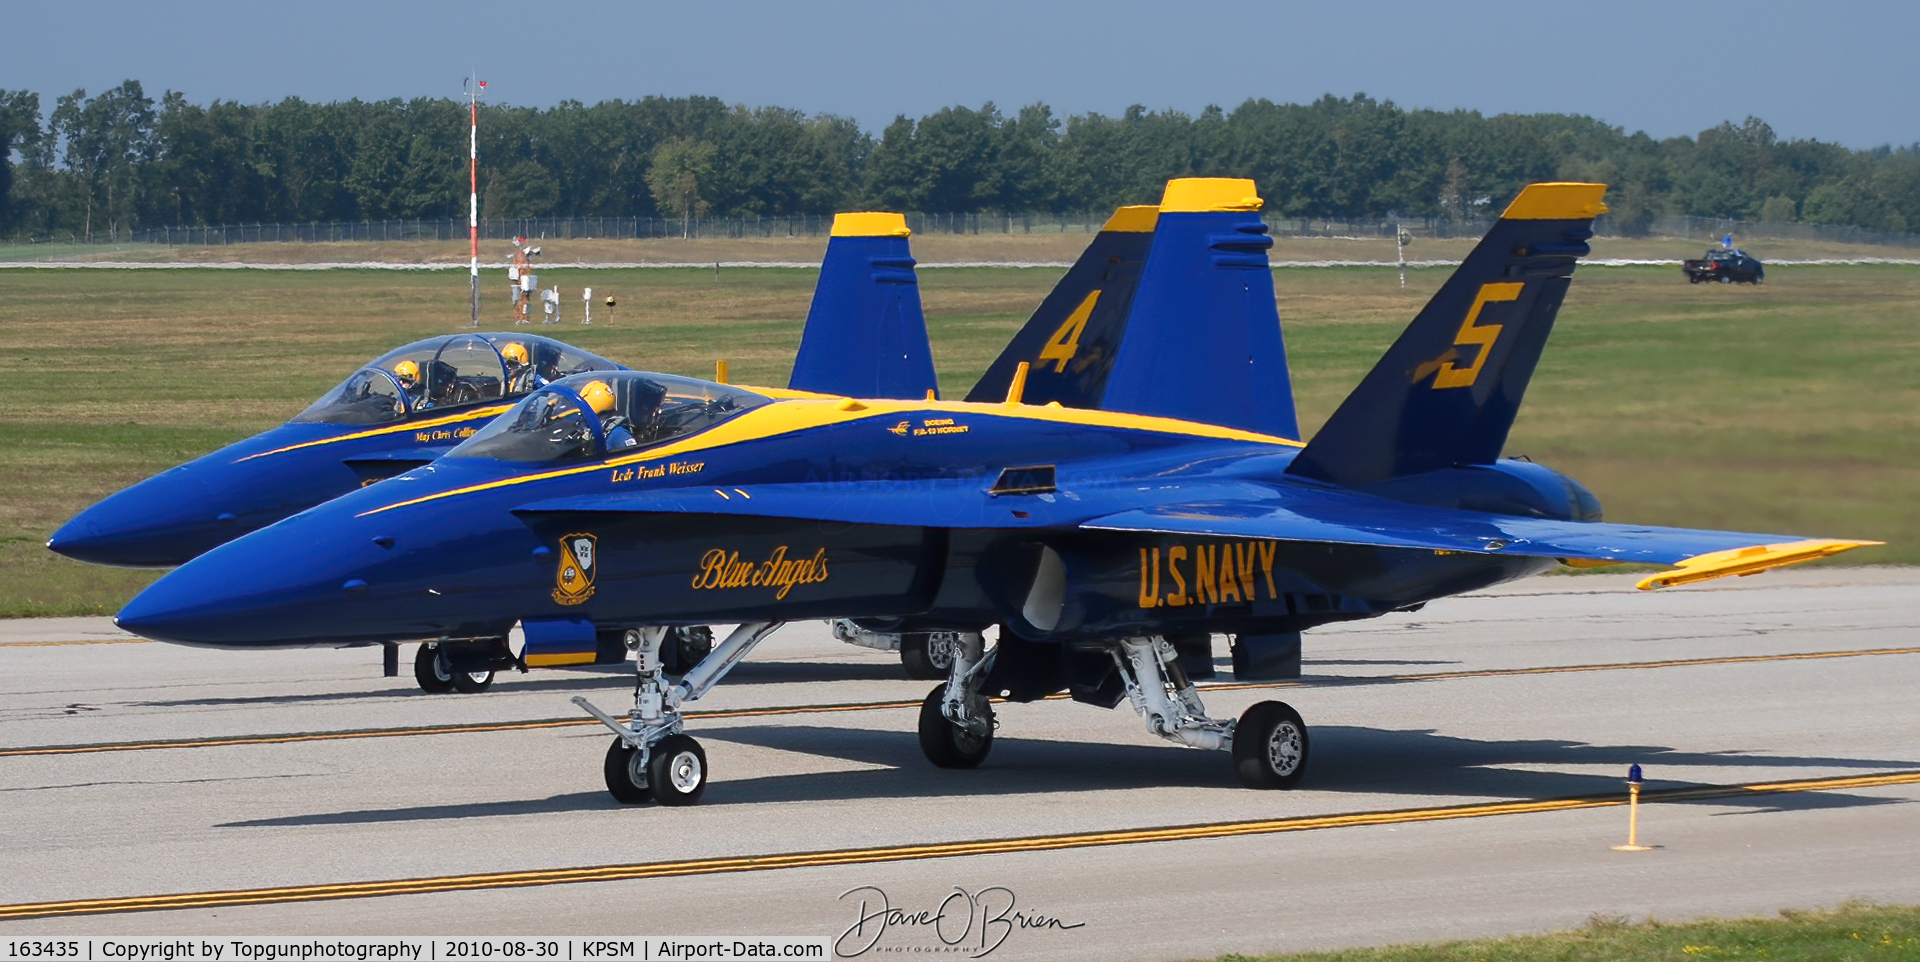 163435, 1987 McDonnell Douglas F/A-18C Hornet C/N 0634/C008, Blue Angels 4 & 5 taxing up to the active